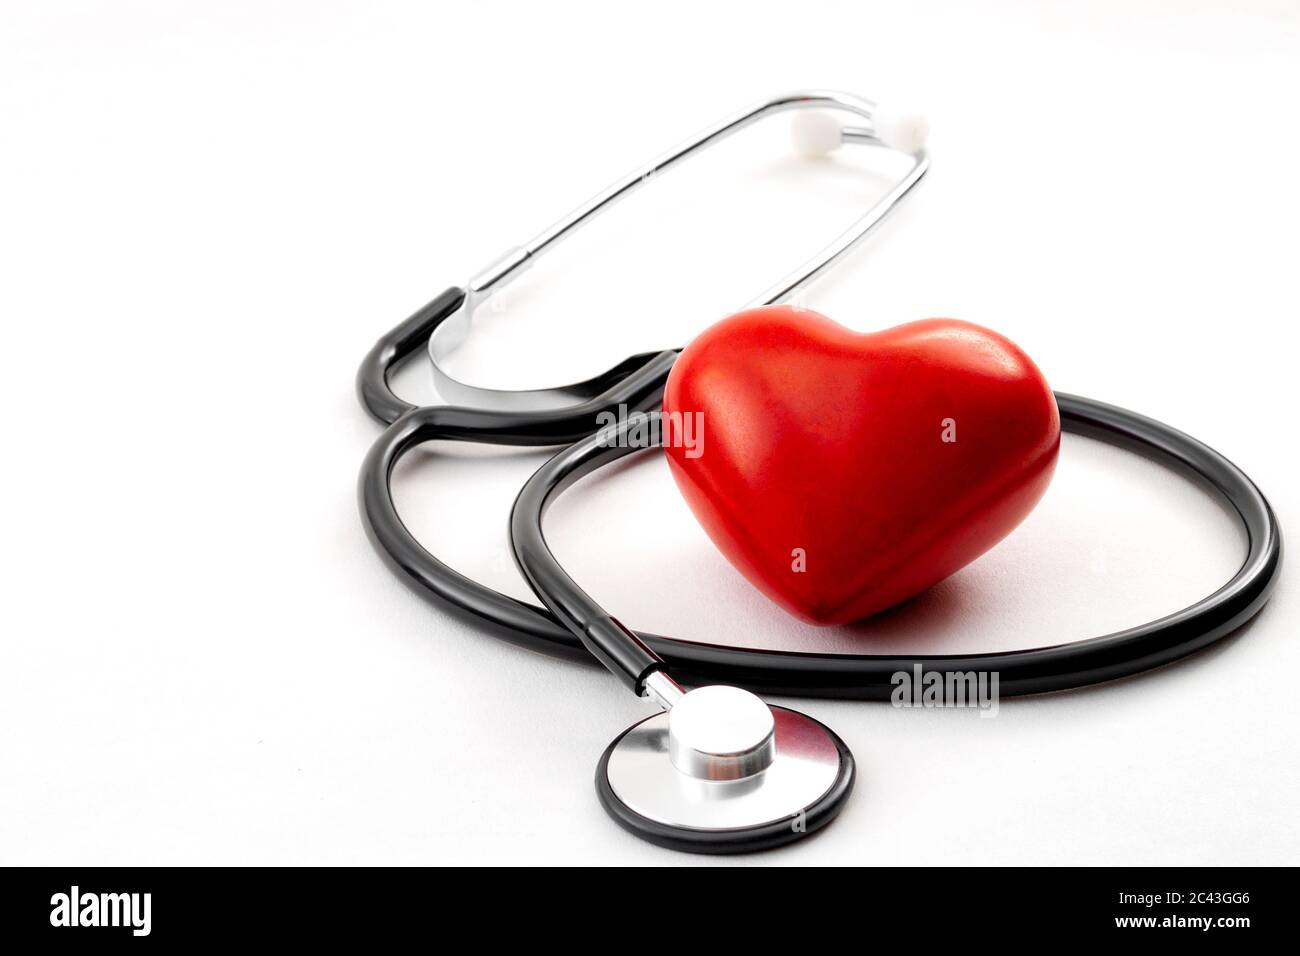 Yearly health check up, disease diagnosis medicine, healthcare and cardiology concept with a red heart and a stethoscope isolated on a hospital white Stock Photo